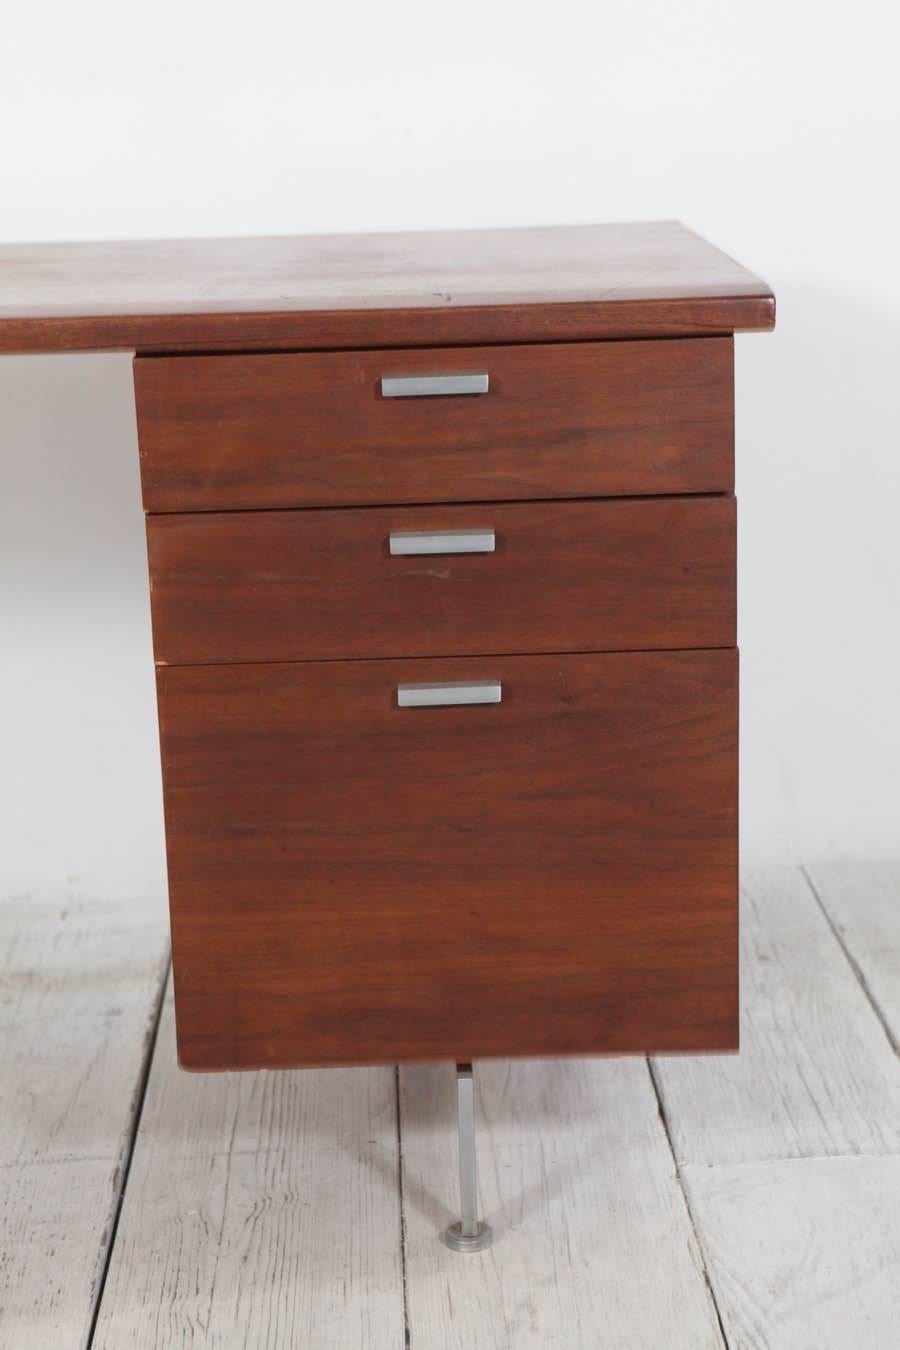 Classic mid-century modern secretary's desk with two stationery drawers and one filing cabinet drawer.